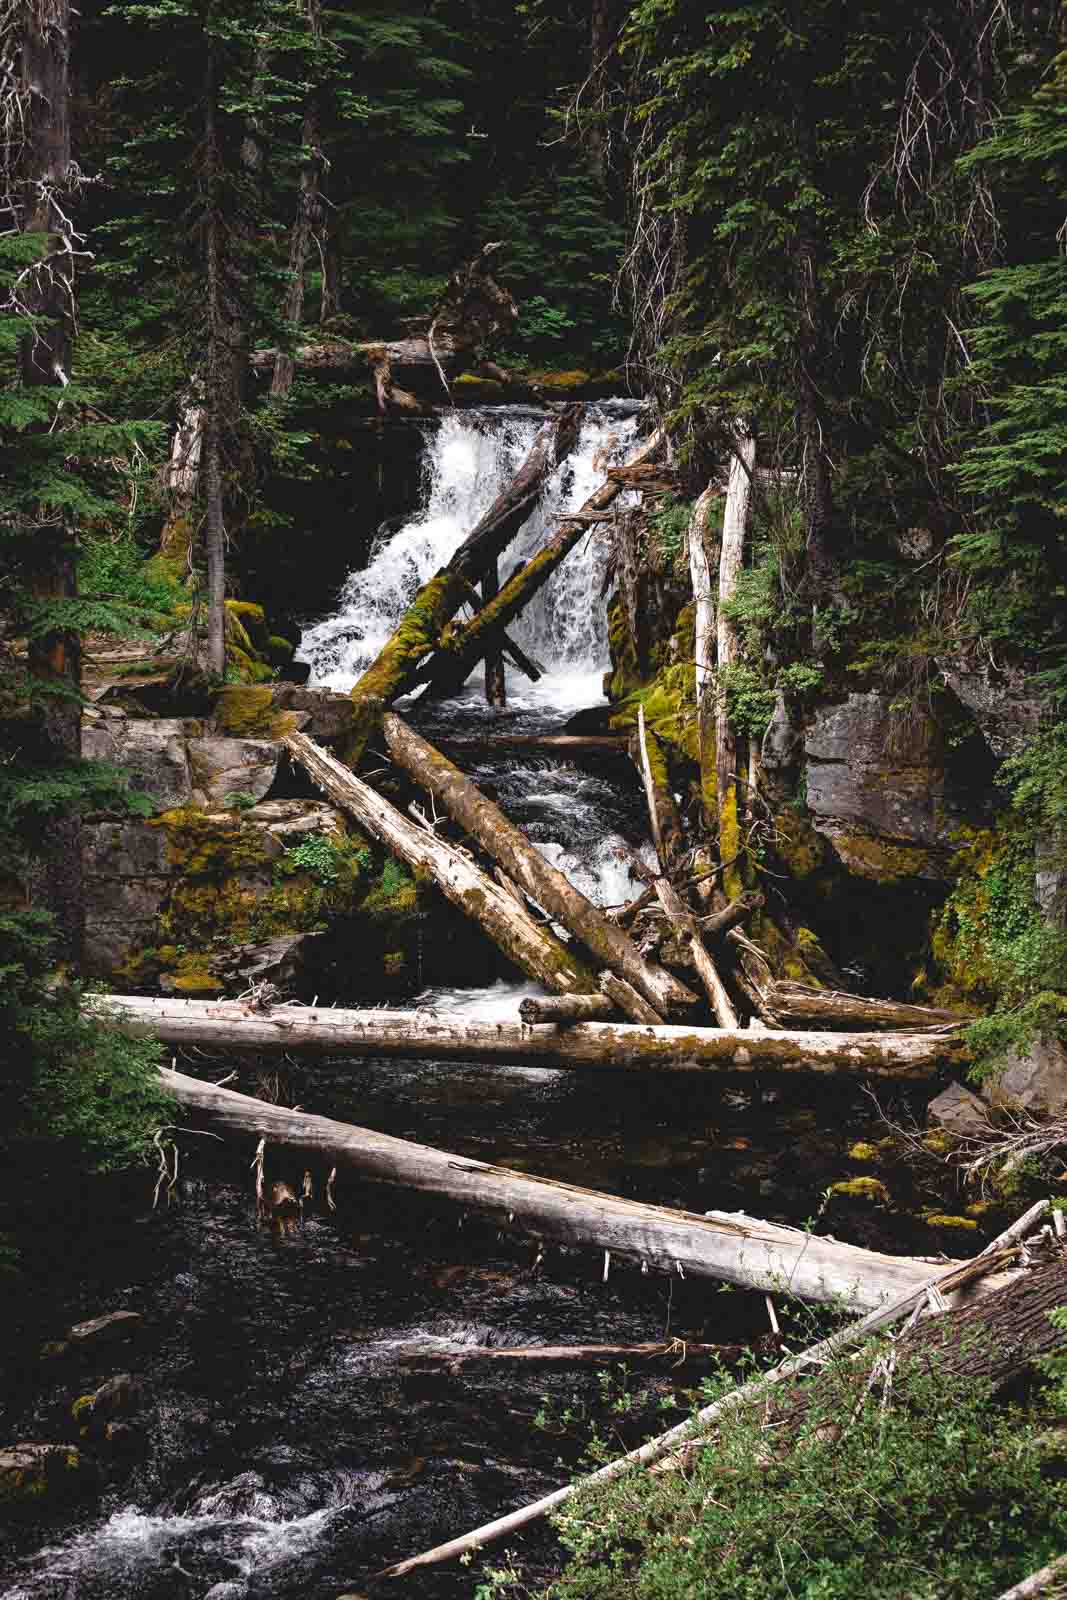 You won't be disappointed by your Tumalo Falls hike!